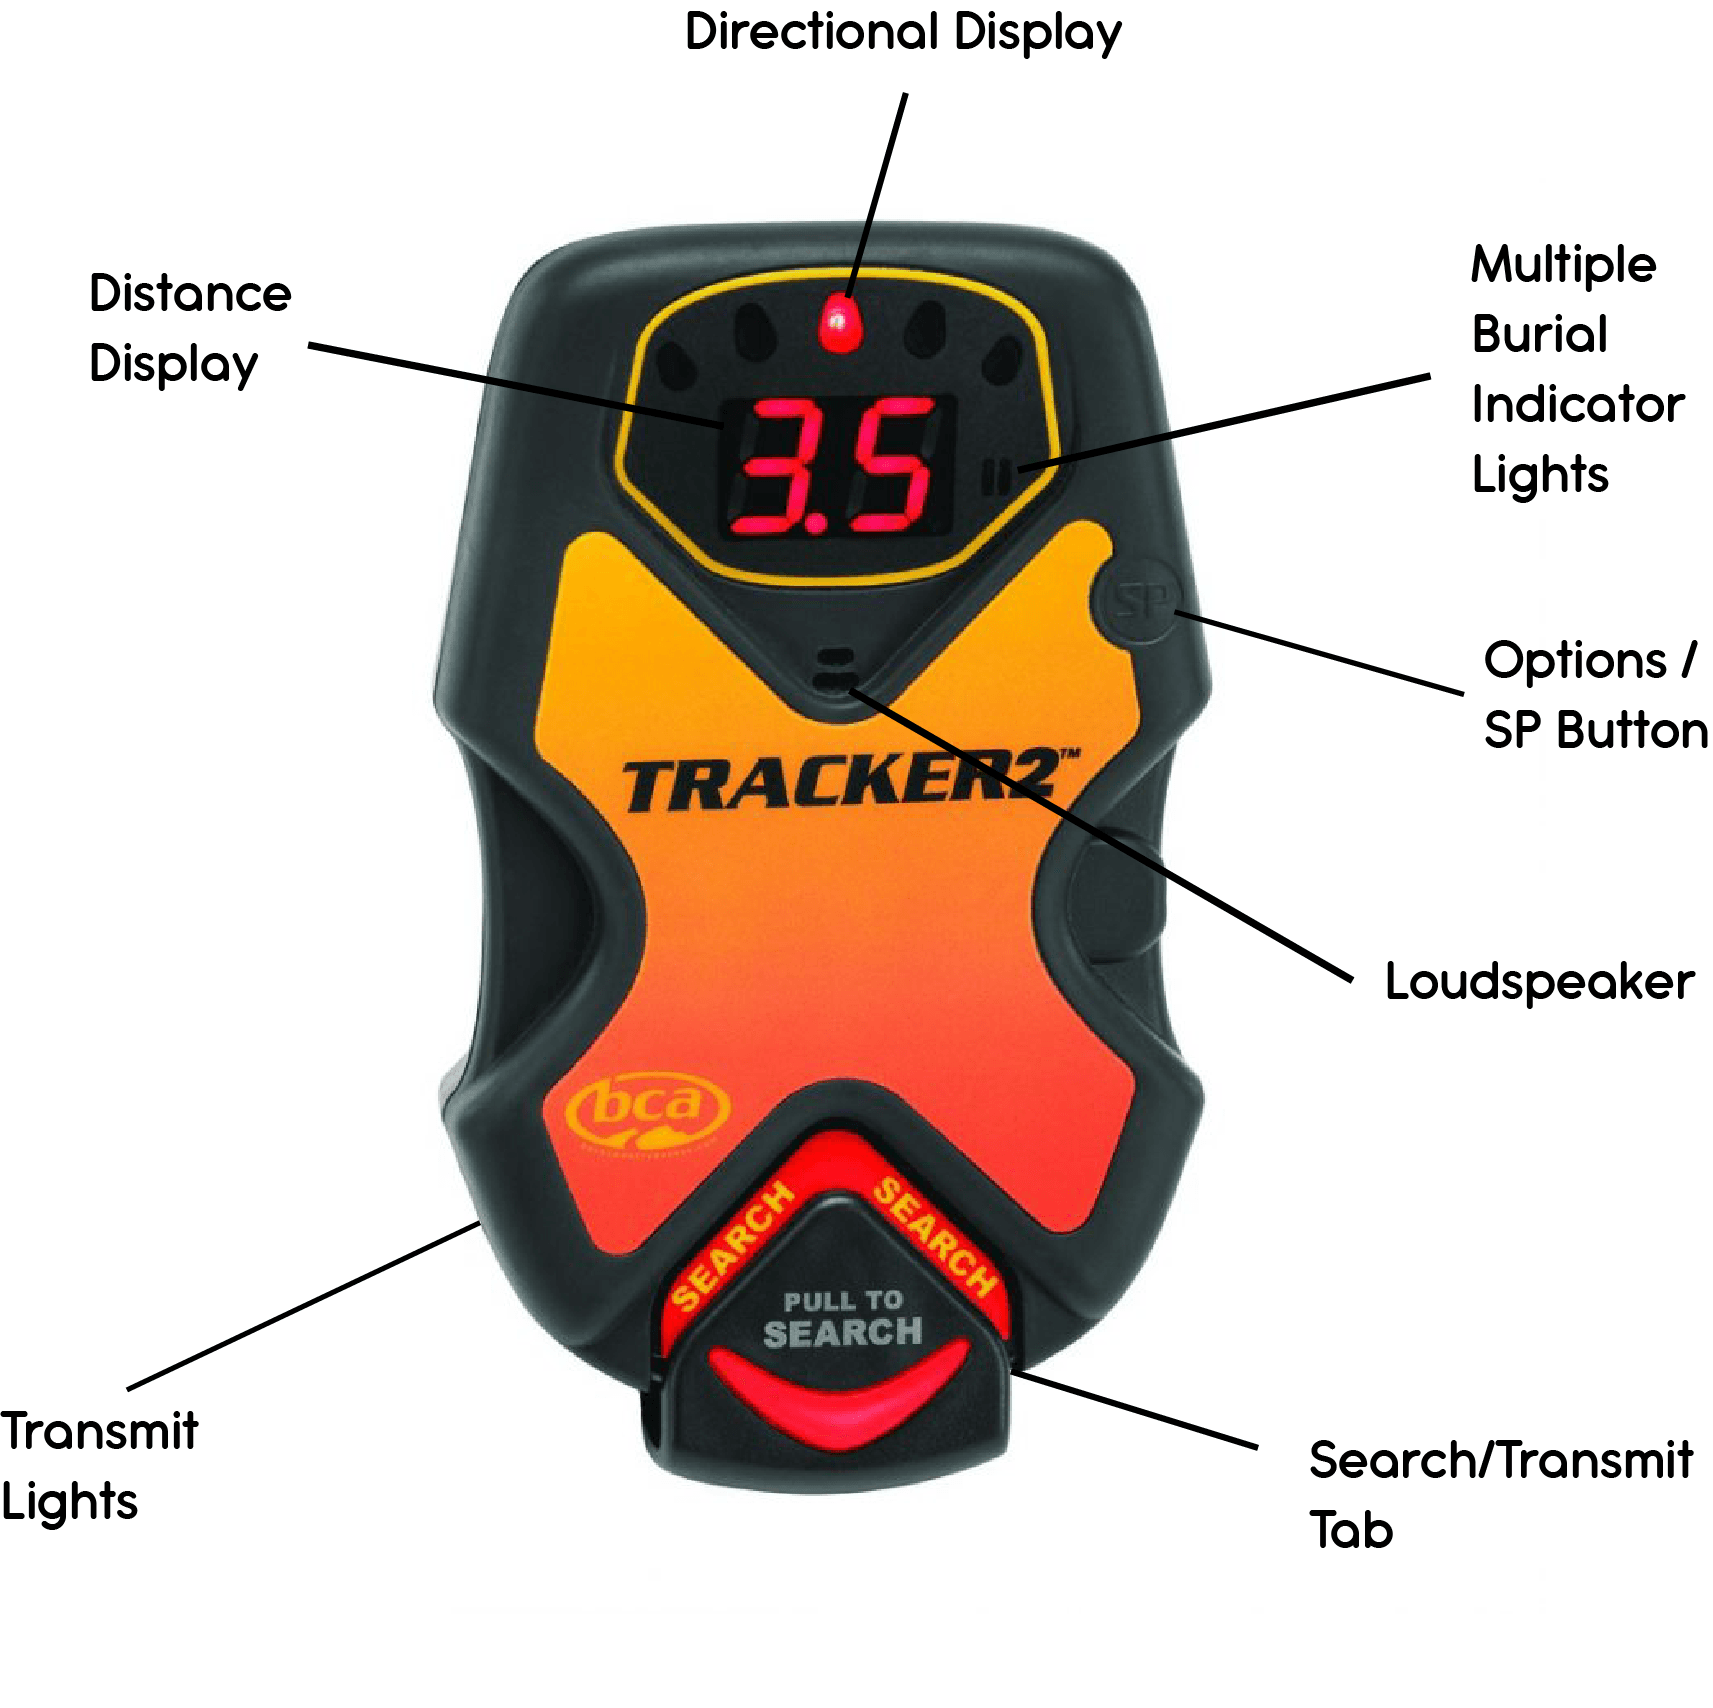 BCA DTS Tracker 2 Features